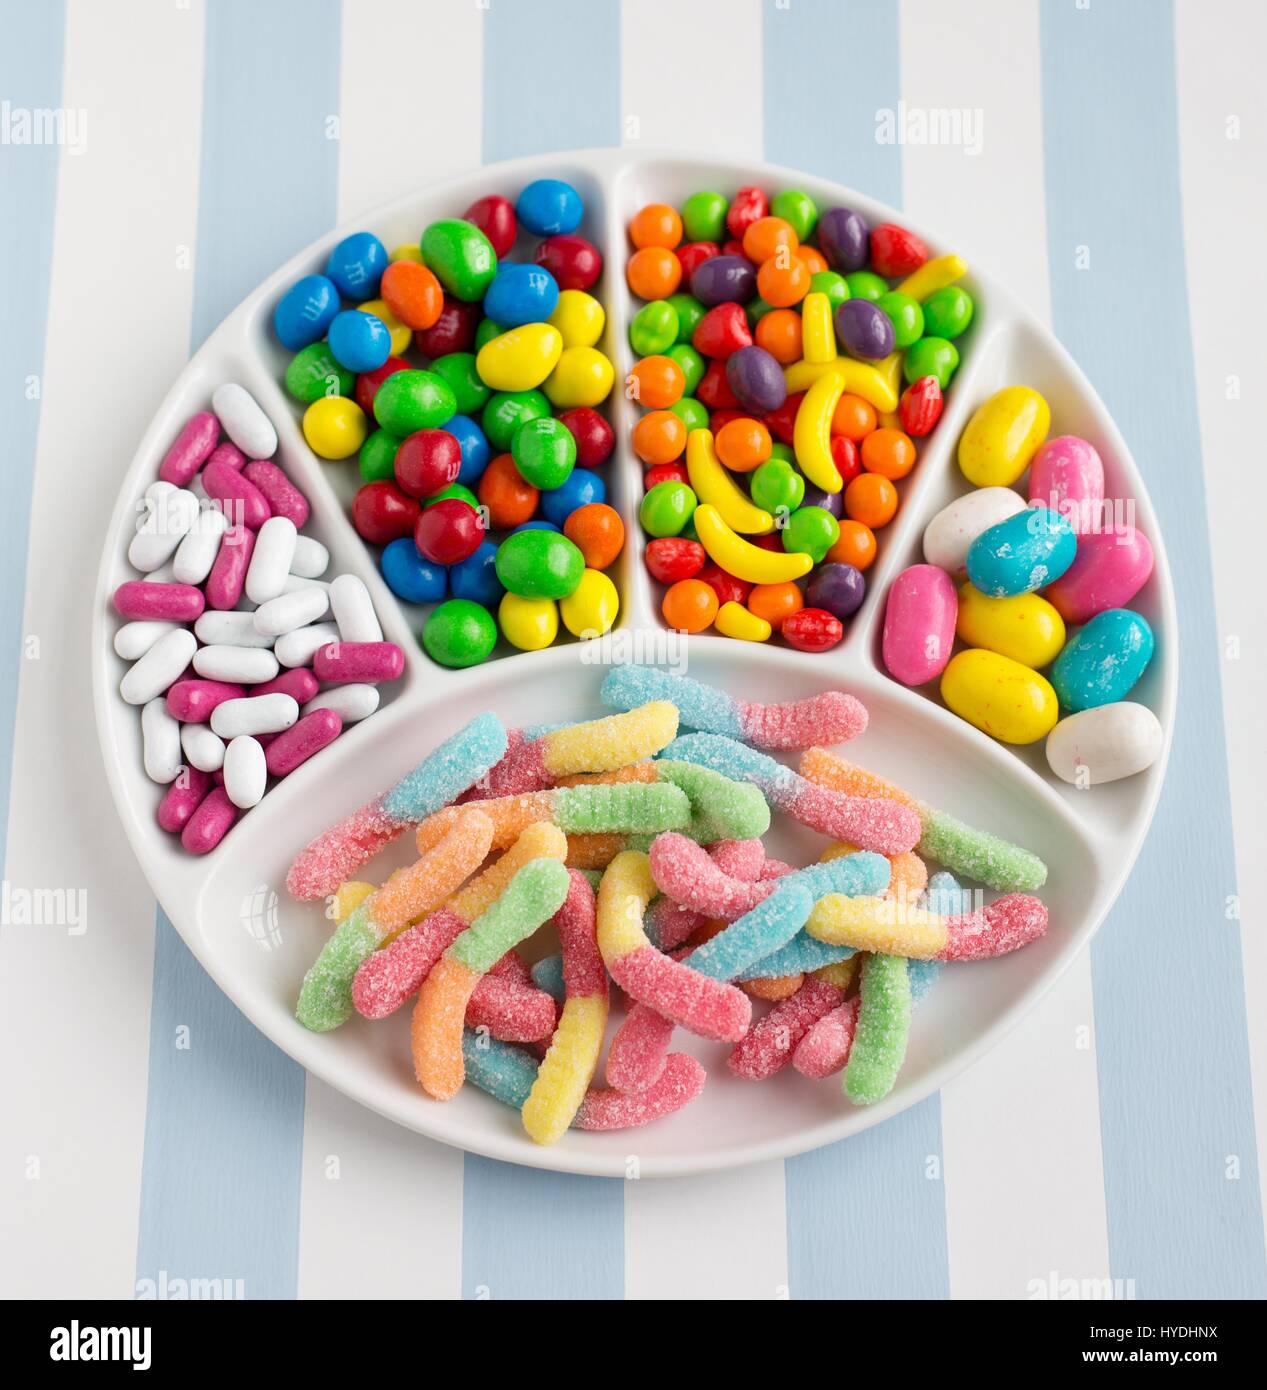 Different varieties of candy on a plate. Stock Photo